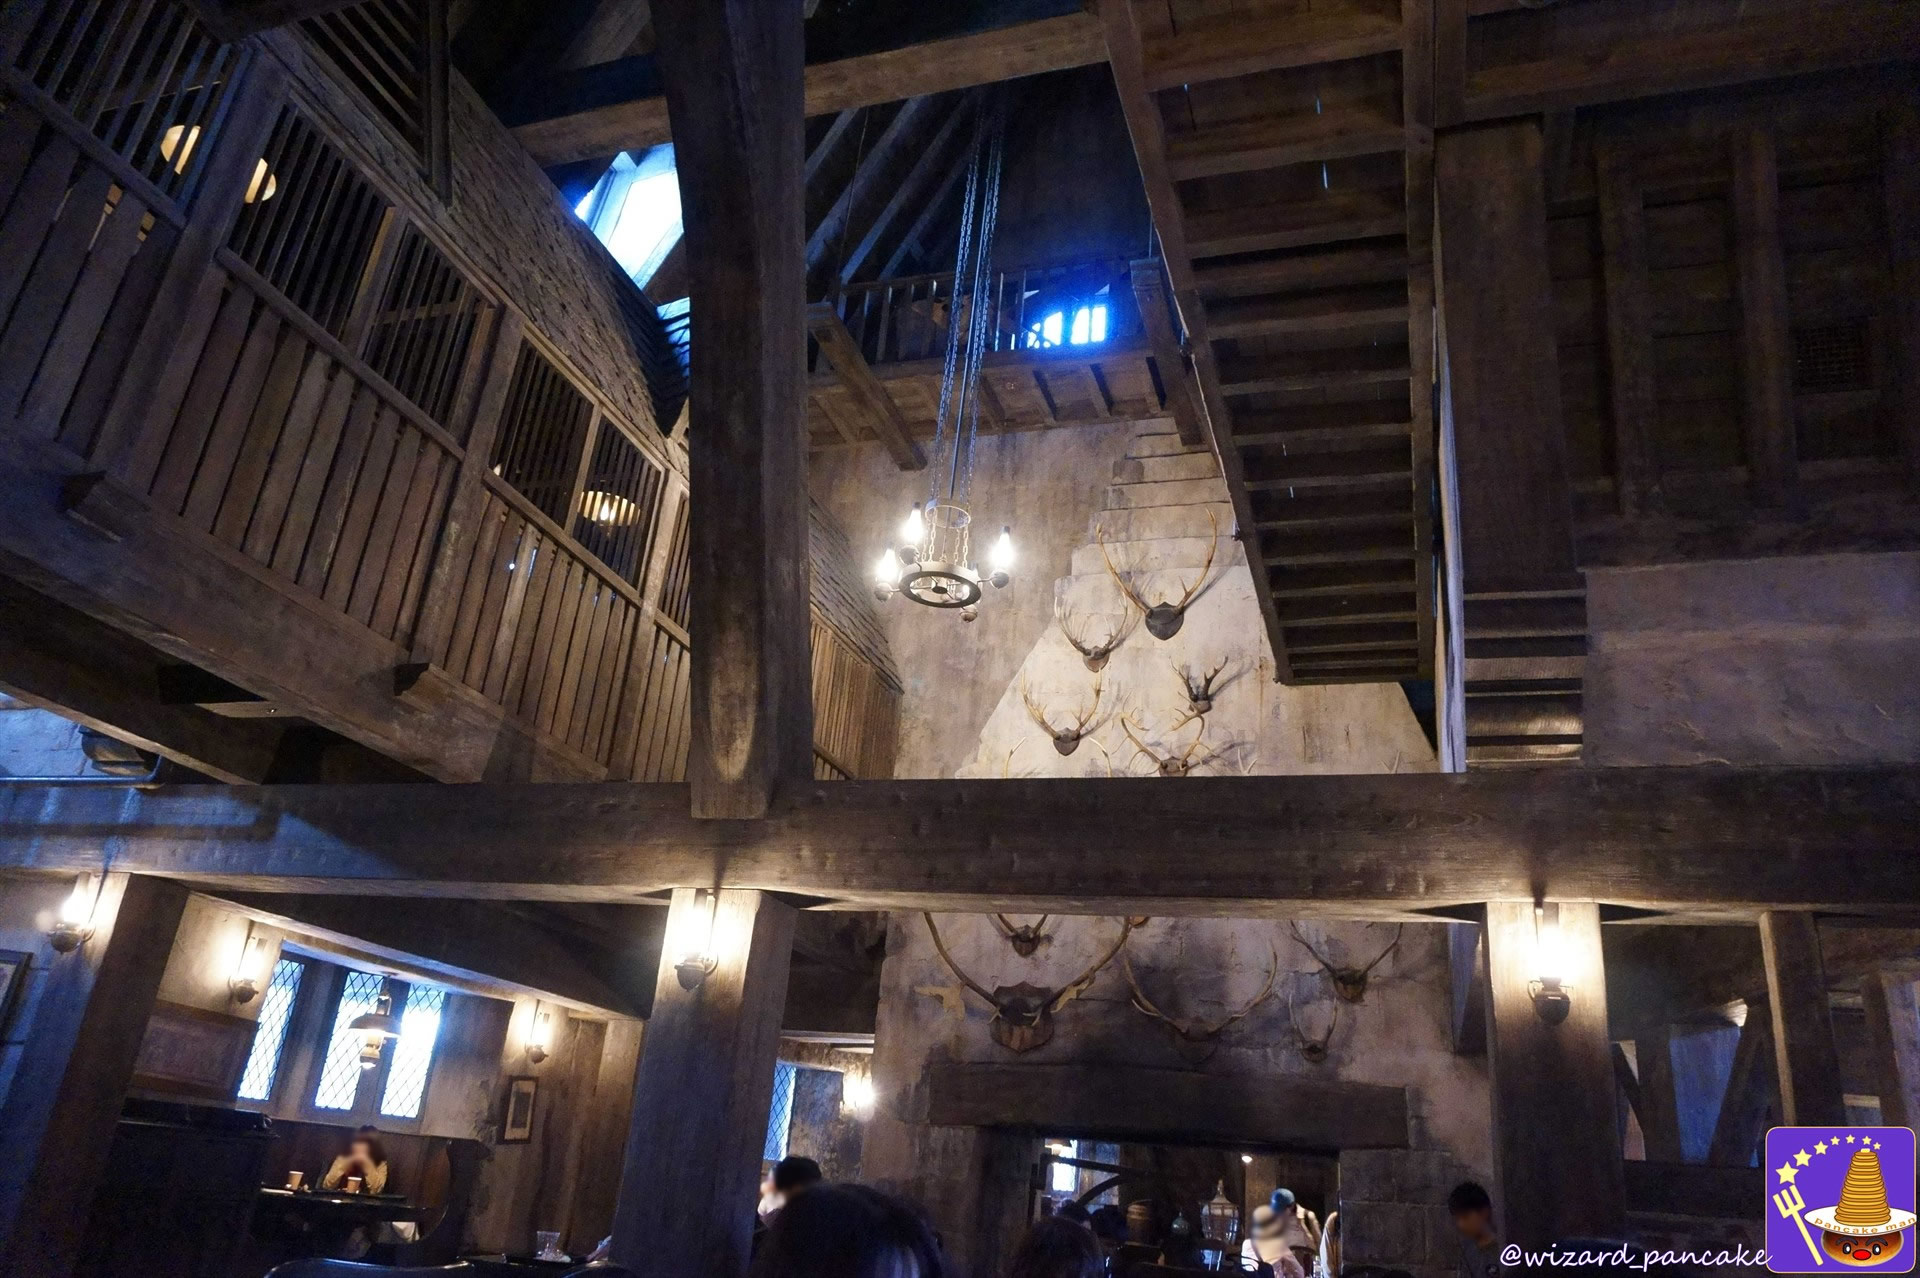 The Three Broomsticks Store interior is from the wizarding world of the Harry Potter films (USJ Harry Potter area).